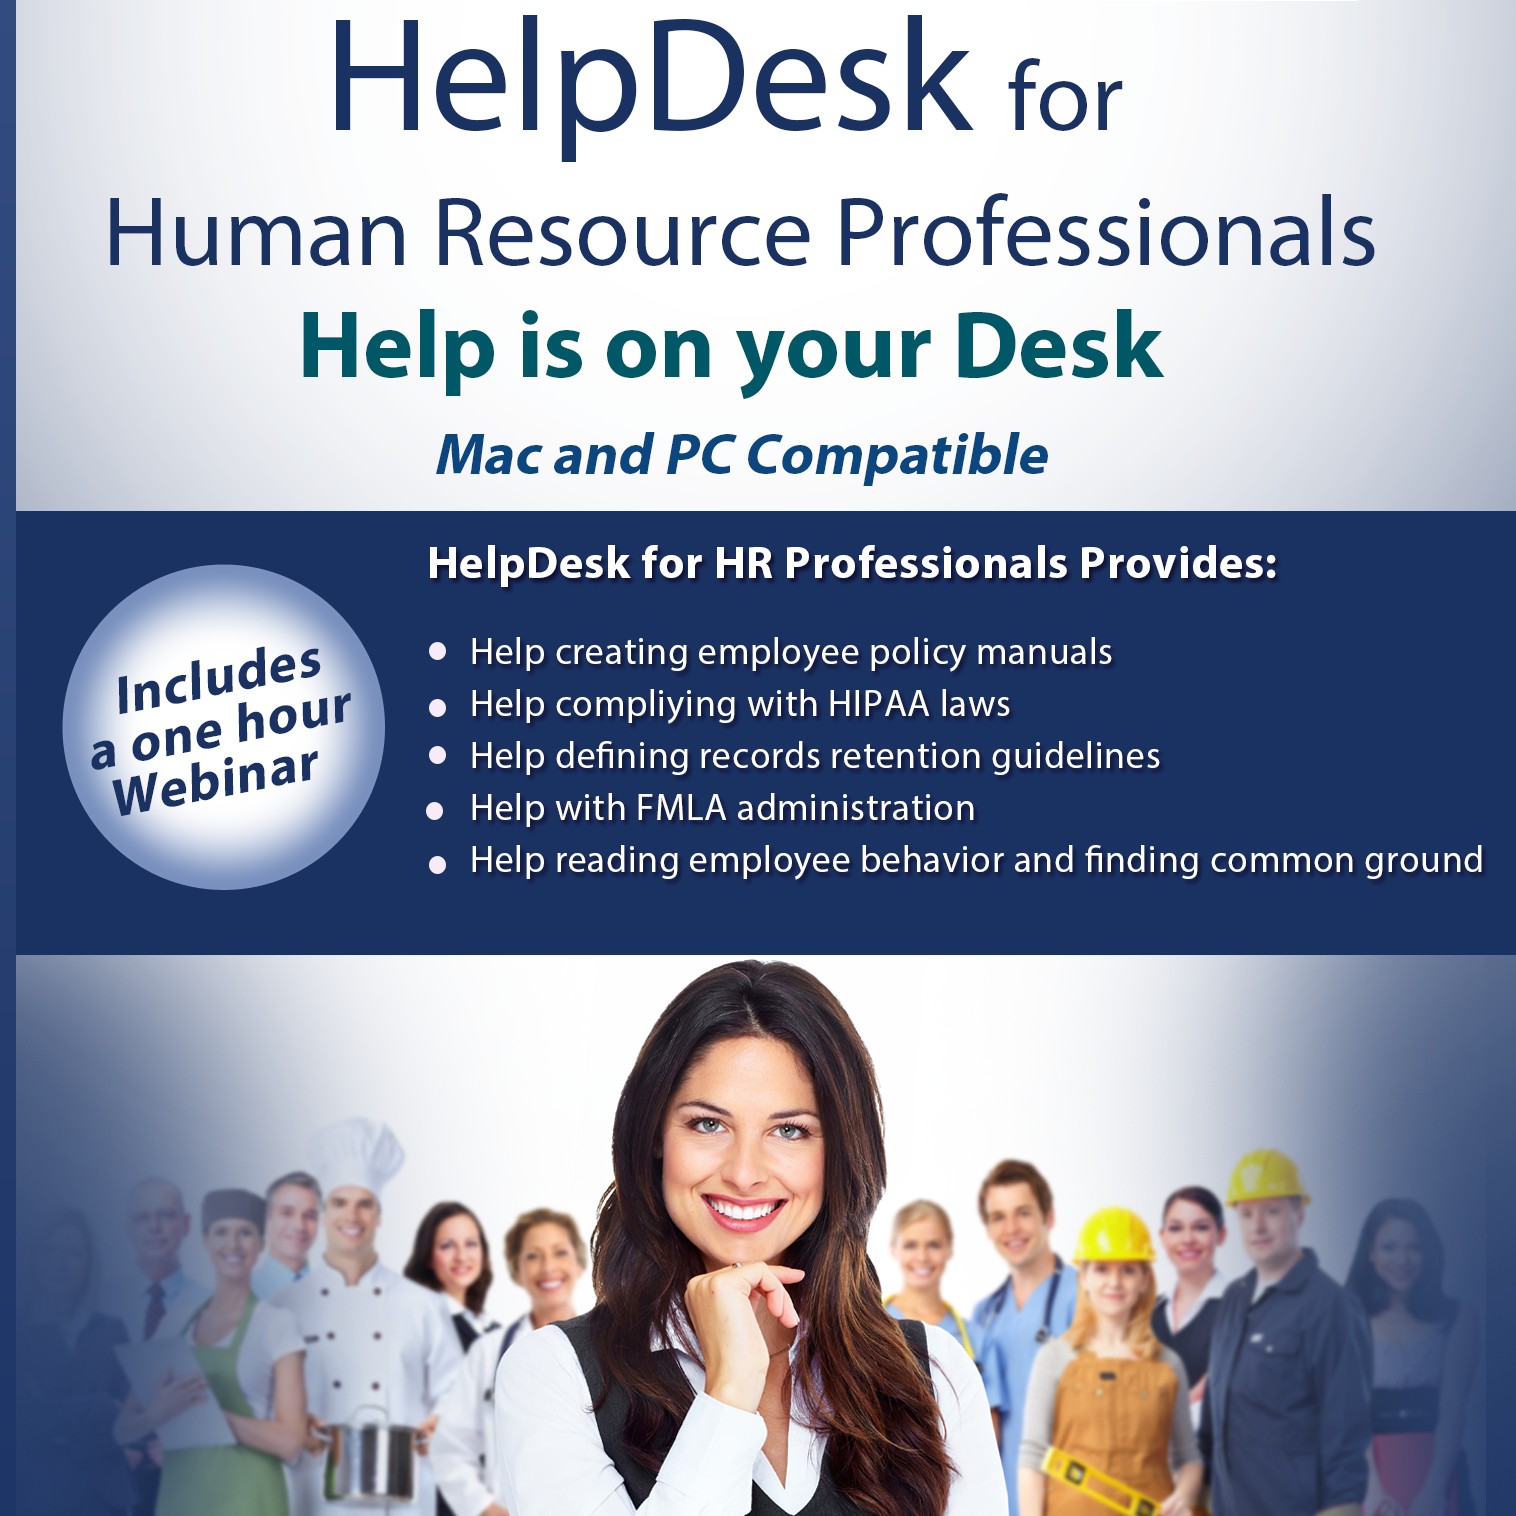 HelpDesk for Human Resource Professionals